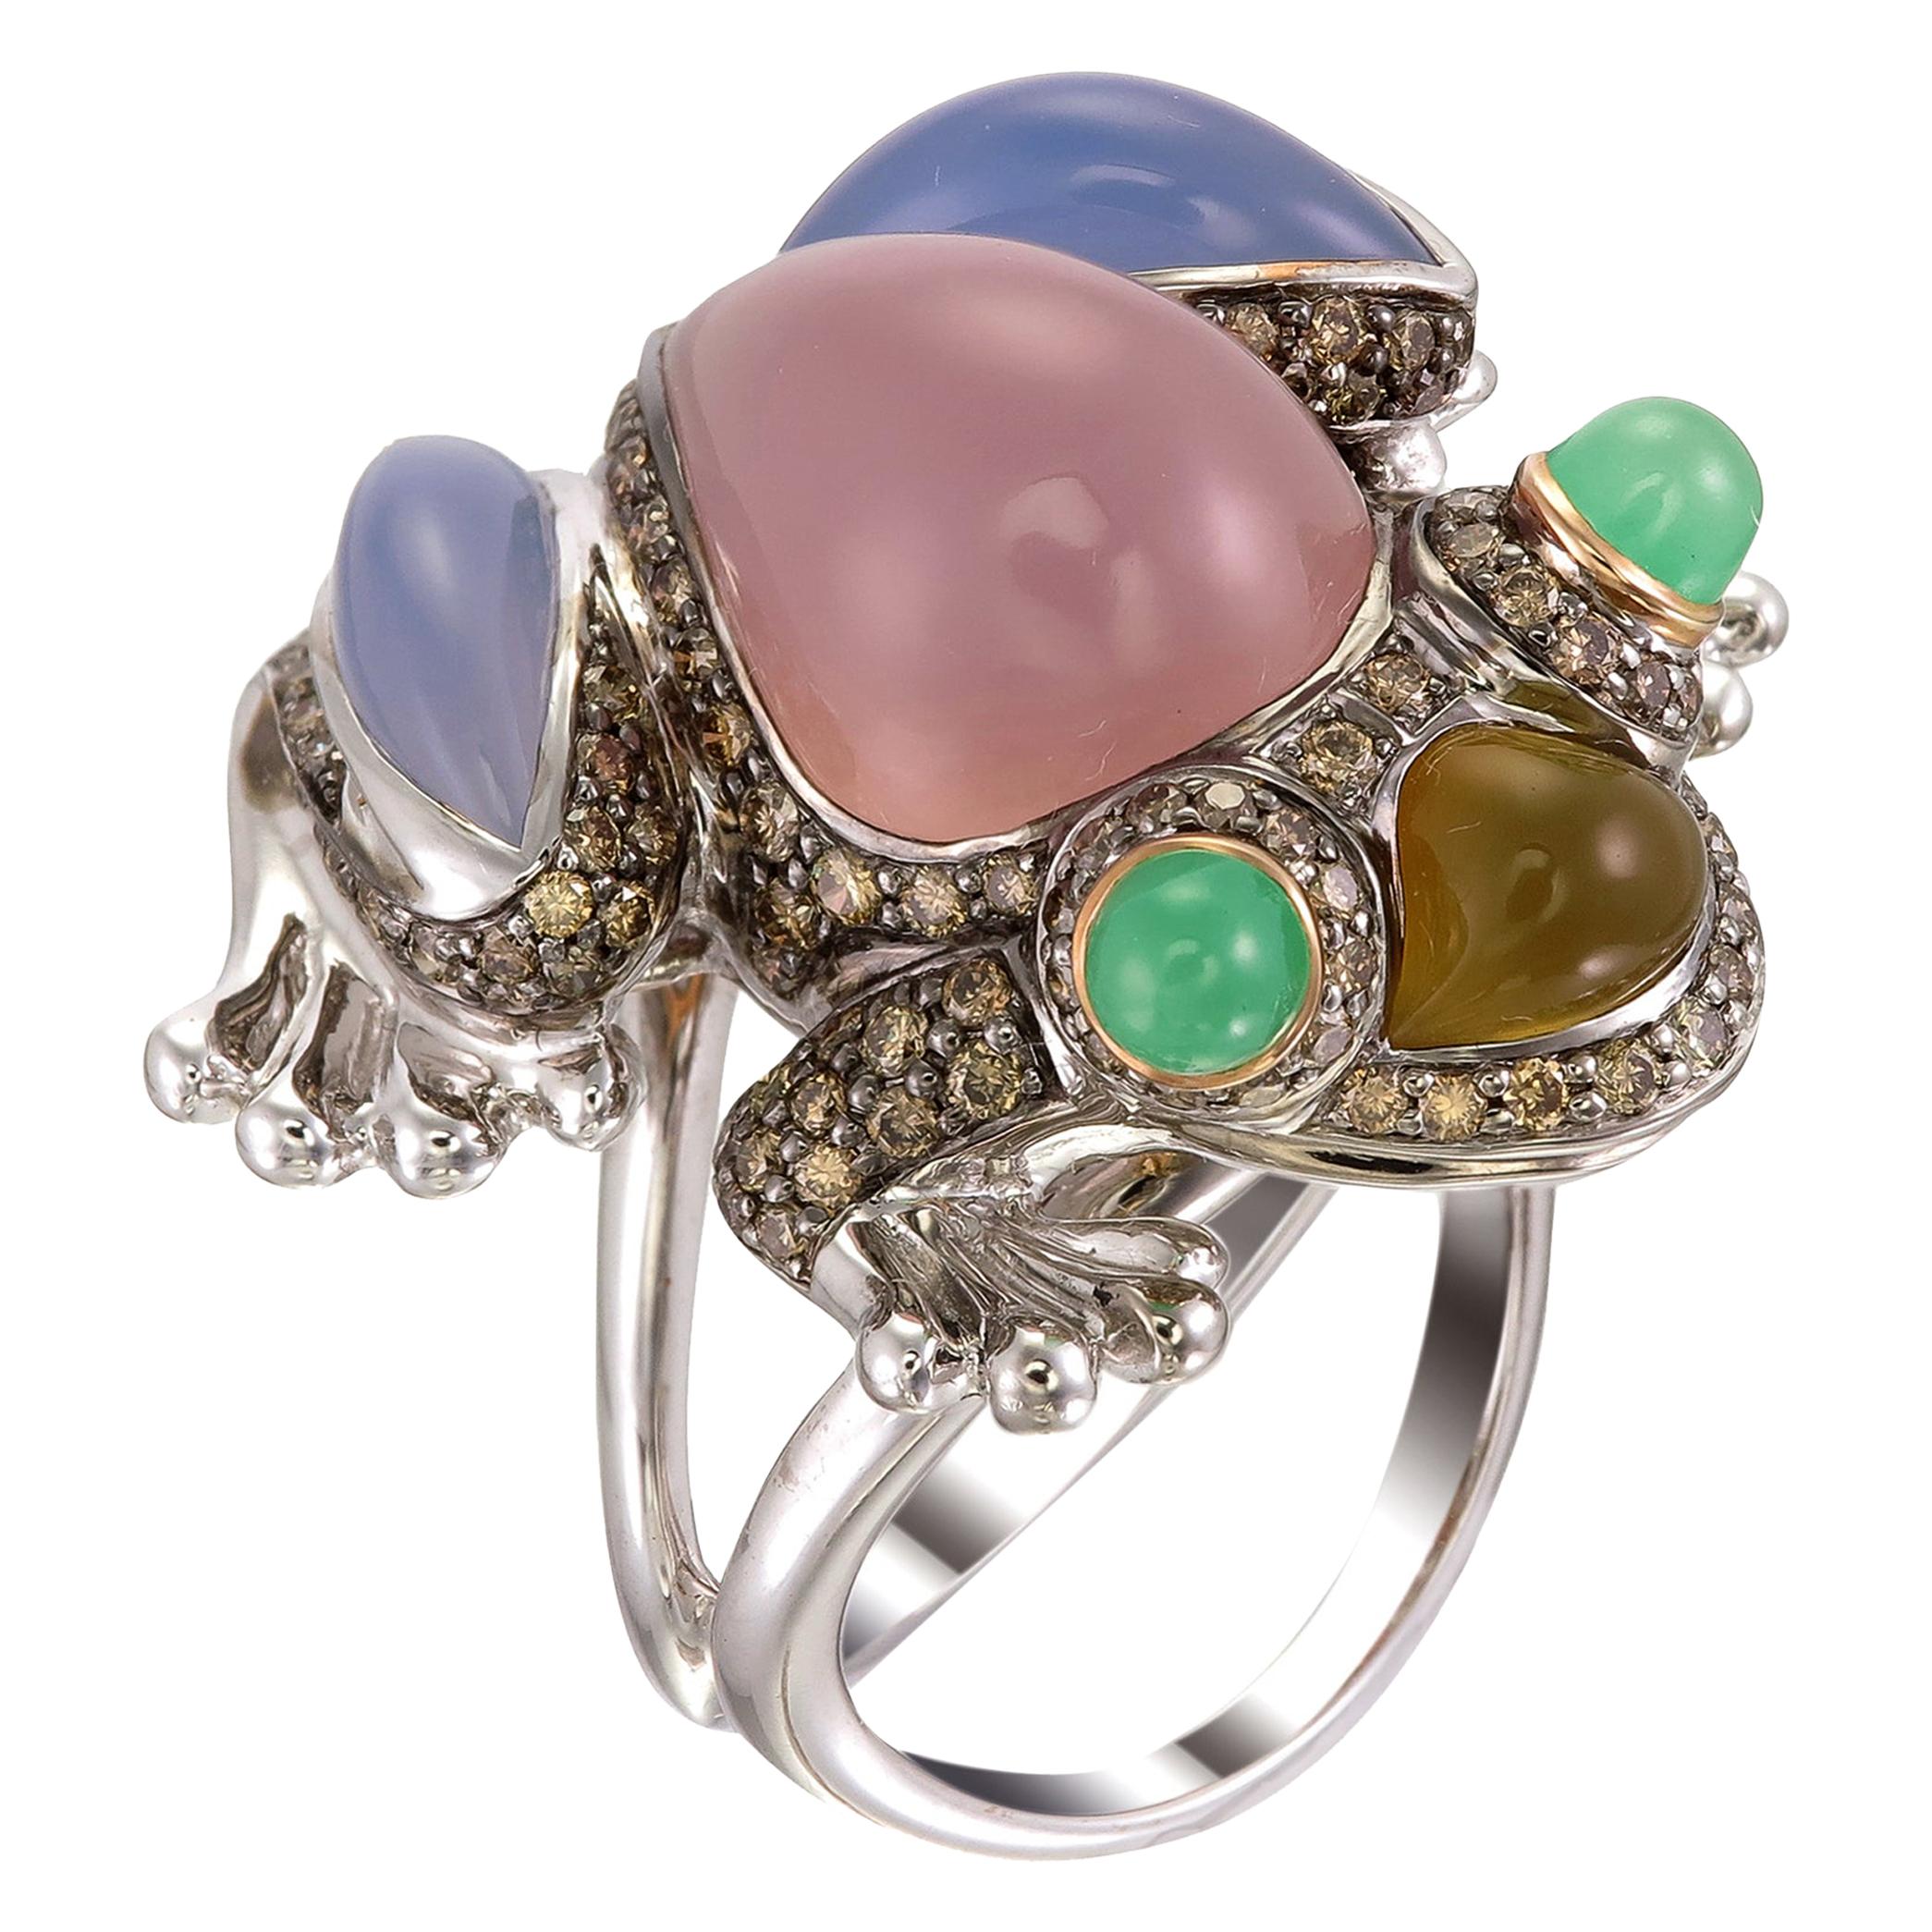 Zorab Creation Multicolored Chalcedony Hoppy the Frog Ring